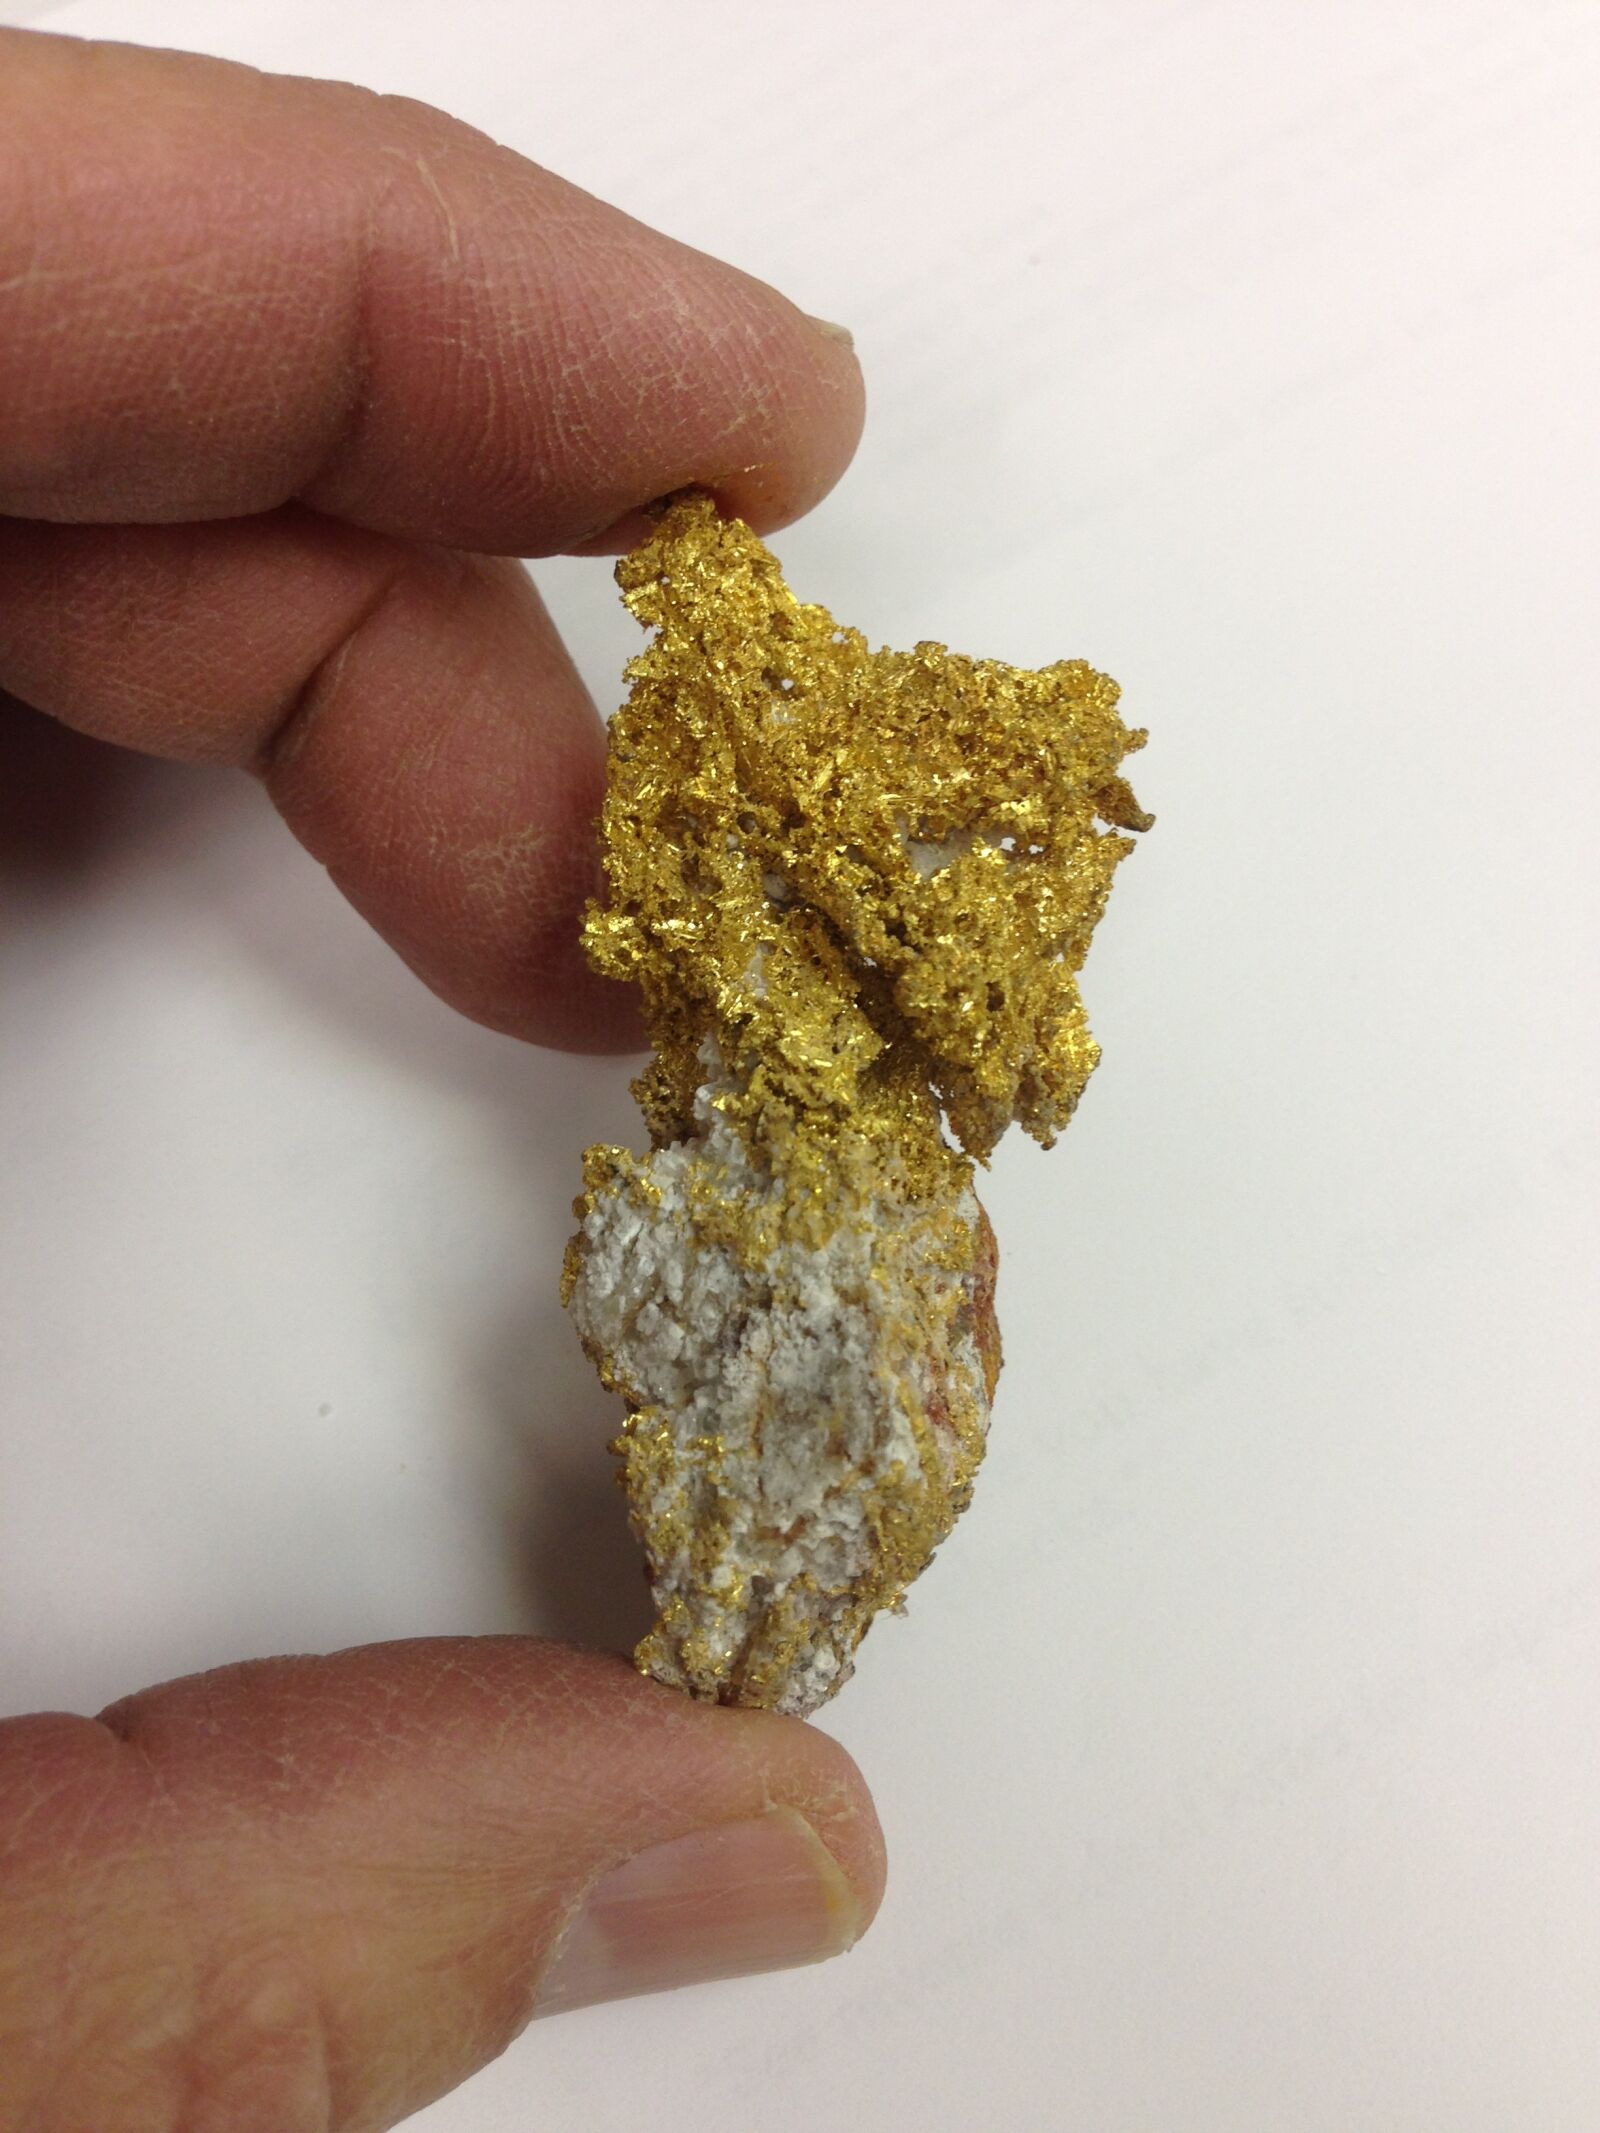 Apple iPhone 5 sample photo. Gold nugget, holding gold photography